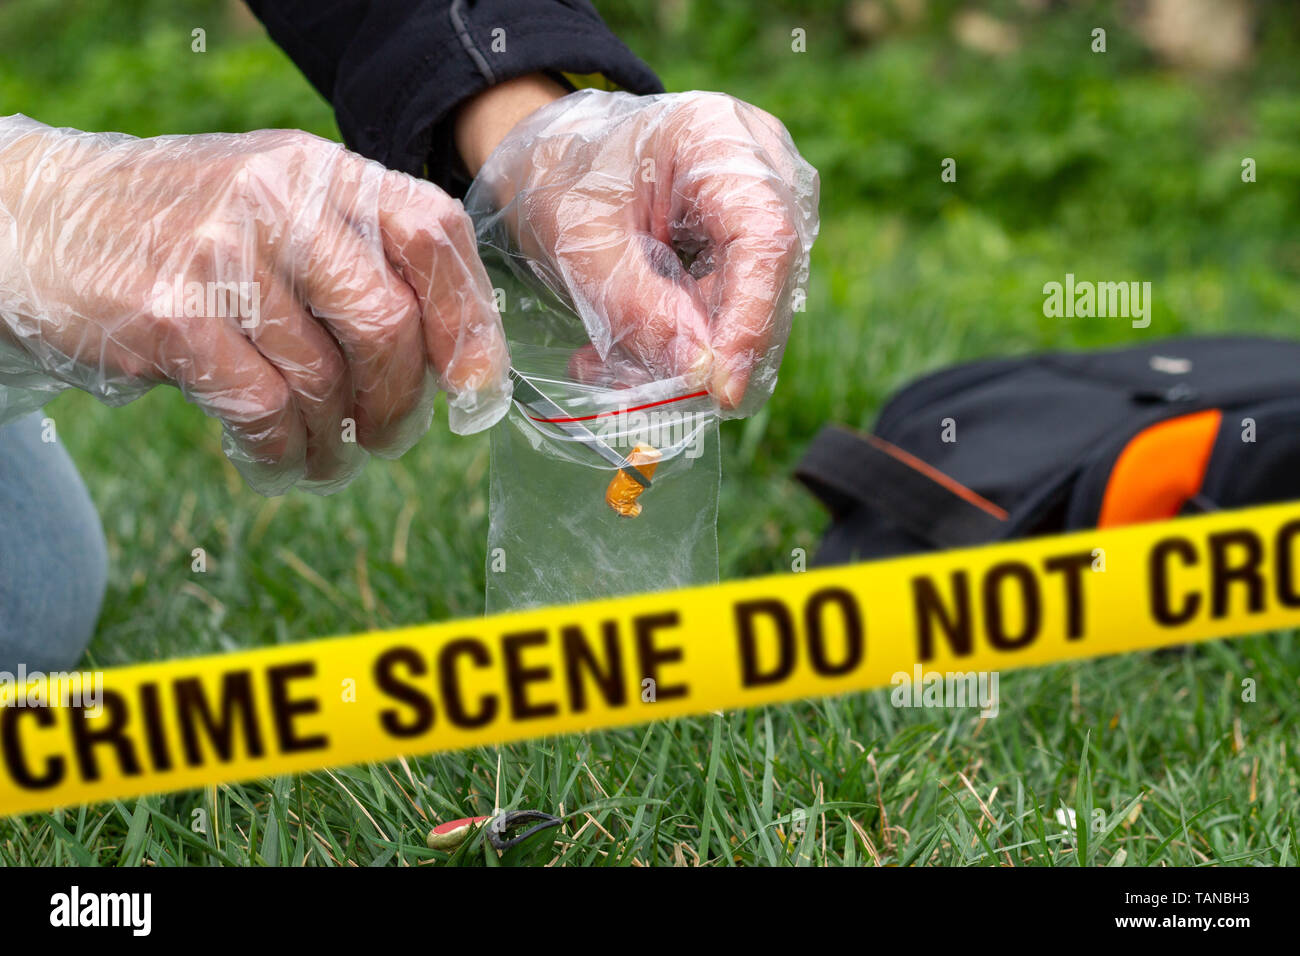 Police detective collecting evidence at crime scene Stock Photo